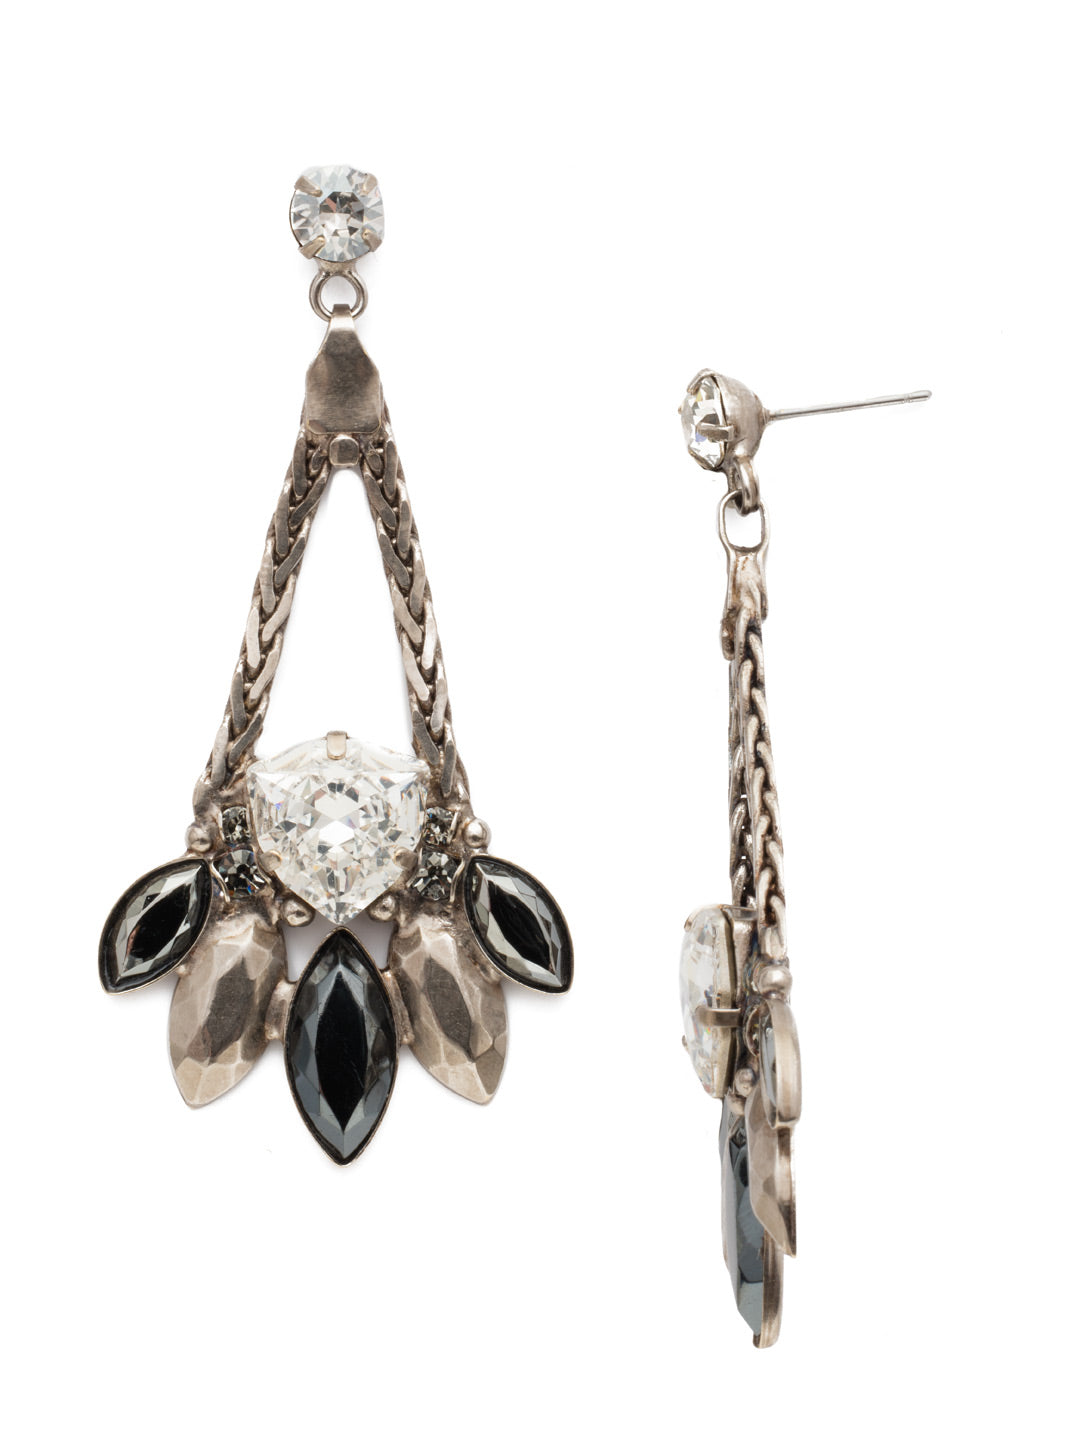 Harmony Dangle Earrings - EDX24ASCRO - <p>The perfect earrings to add that 'wow factor' to any outfit. A small round crystal at the post leads down to a stunning drop design consisting of mixed crystals and navette-shaped stones. From Sorrelli's Crystal Rock collection in our Antique Silver-tone finish.</p>